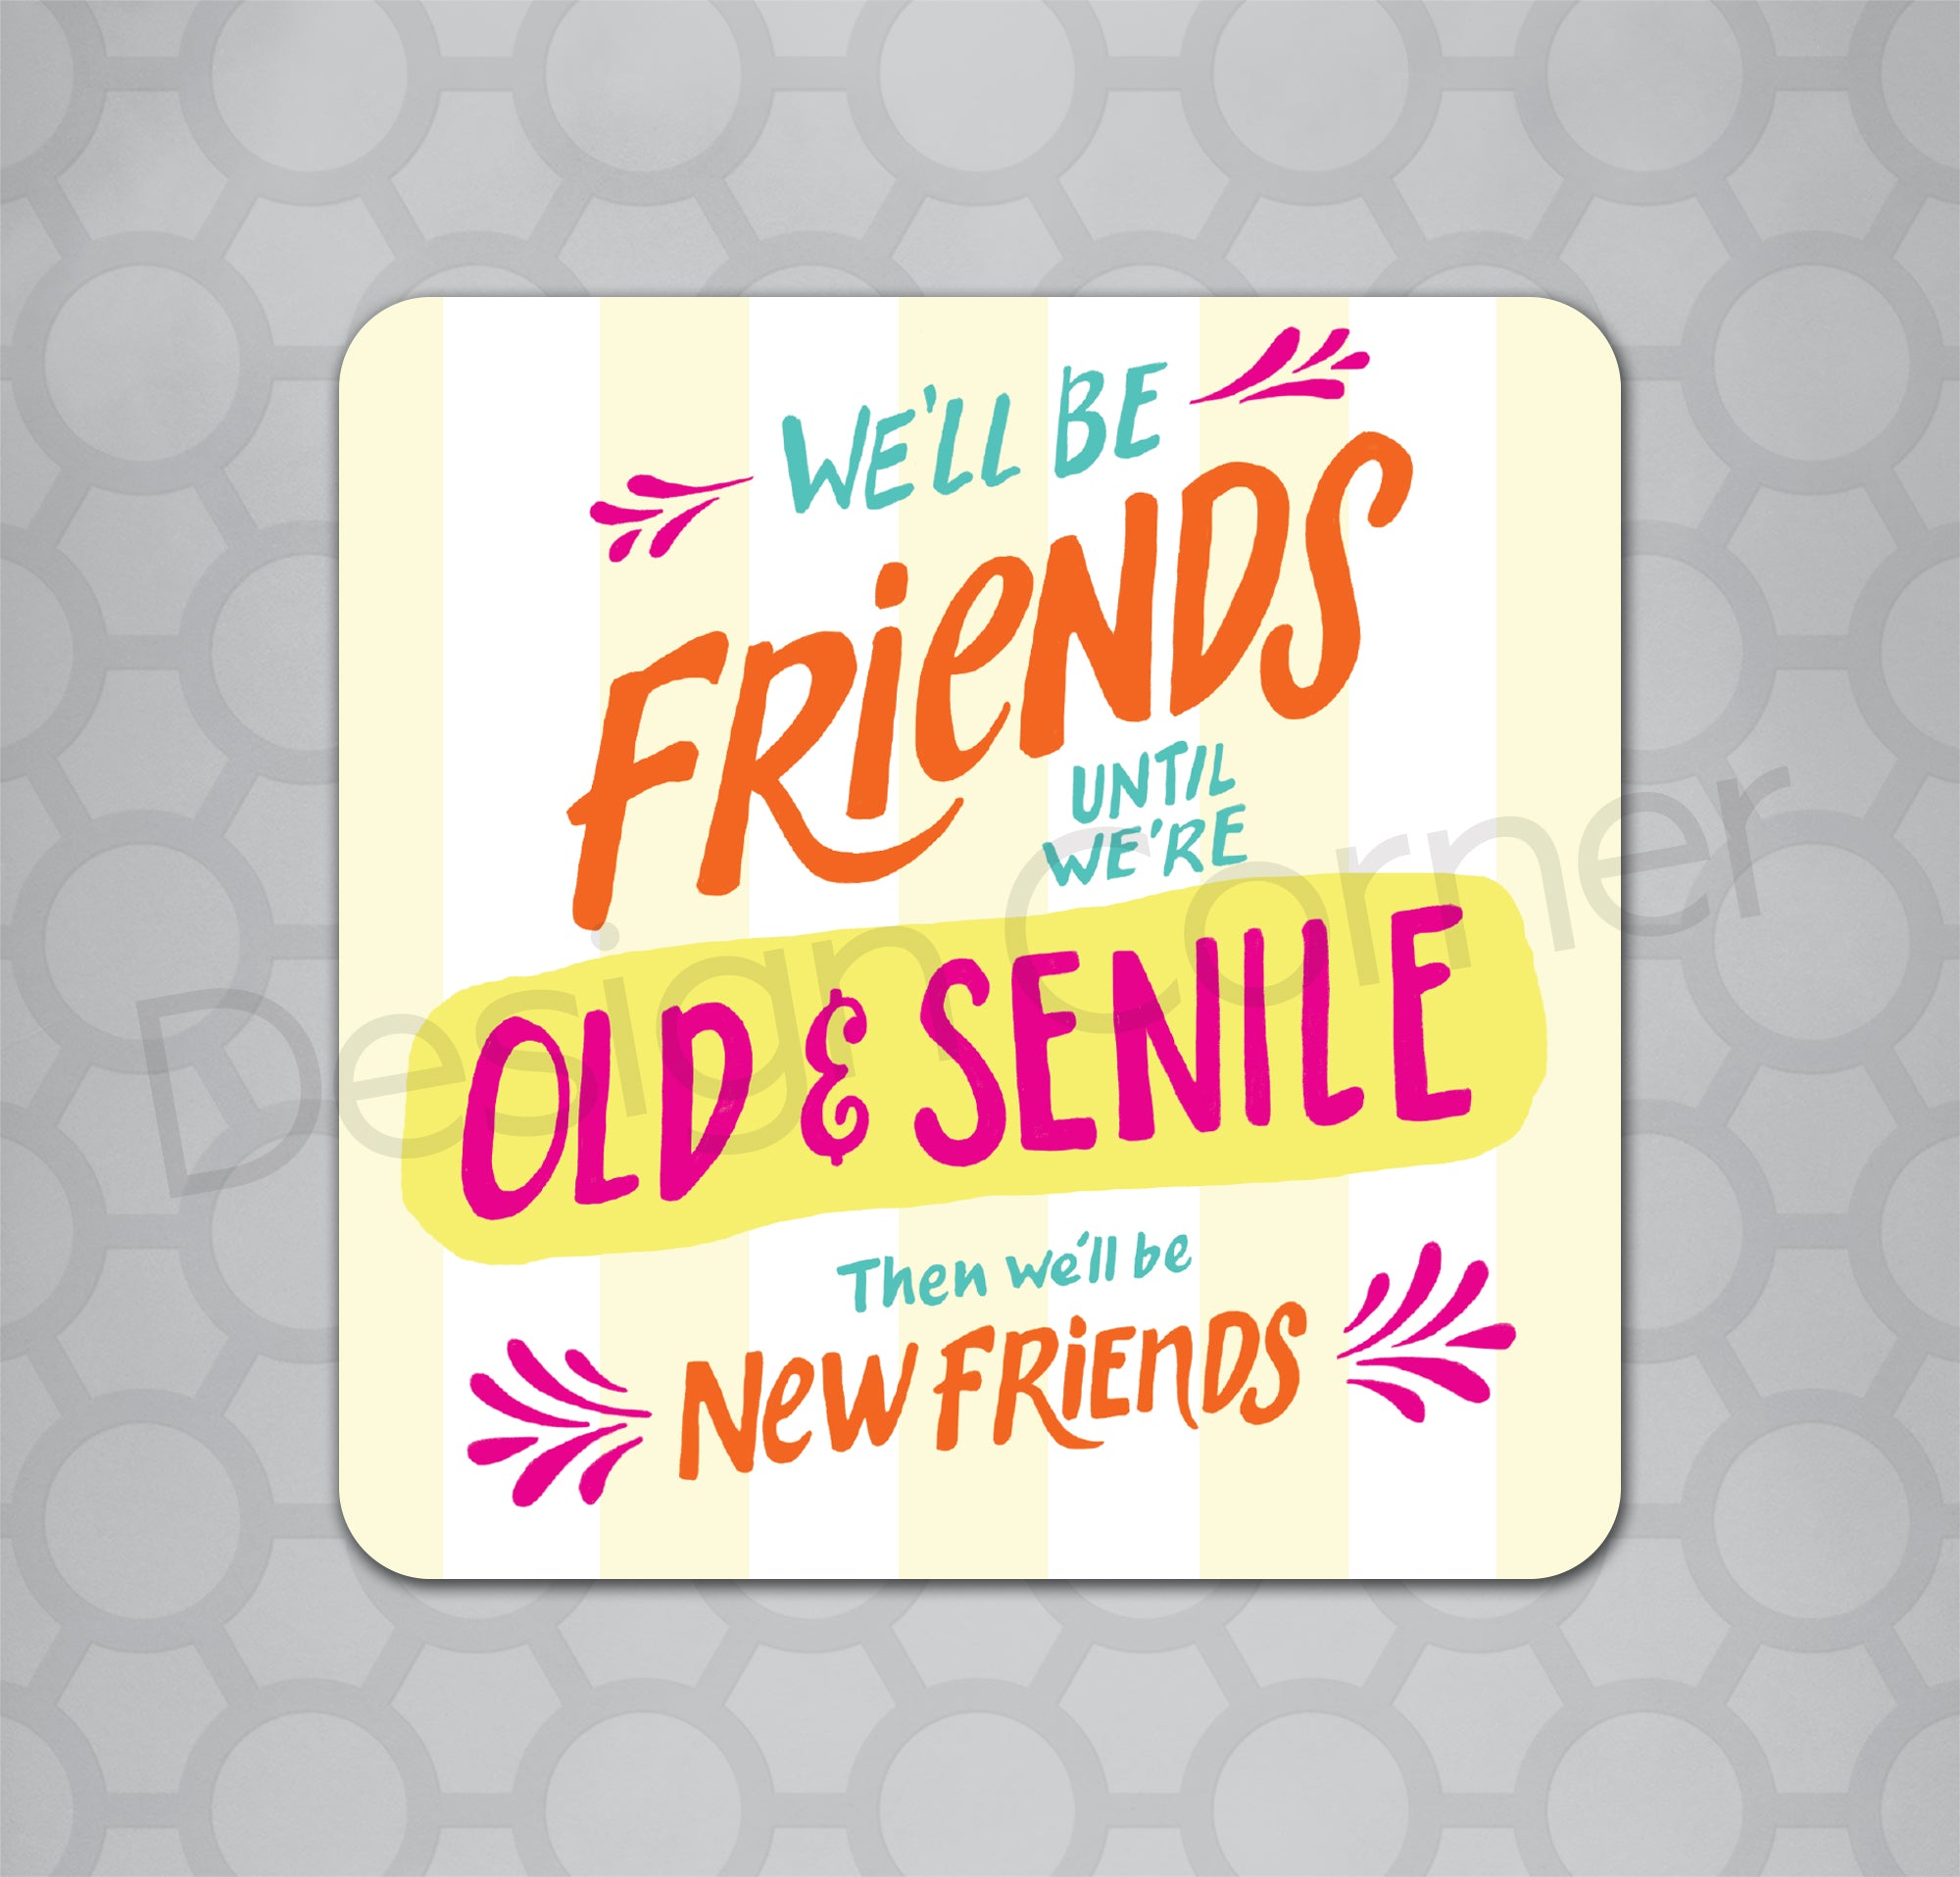 Hand lettered text on a coaster that says "We'll be friends until we're old and senile. Then we'll be new friends."